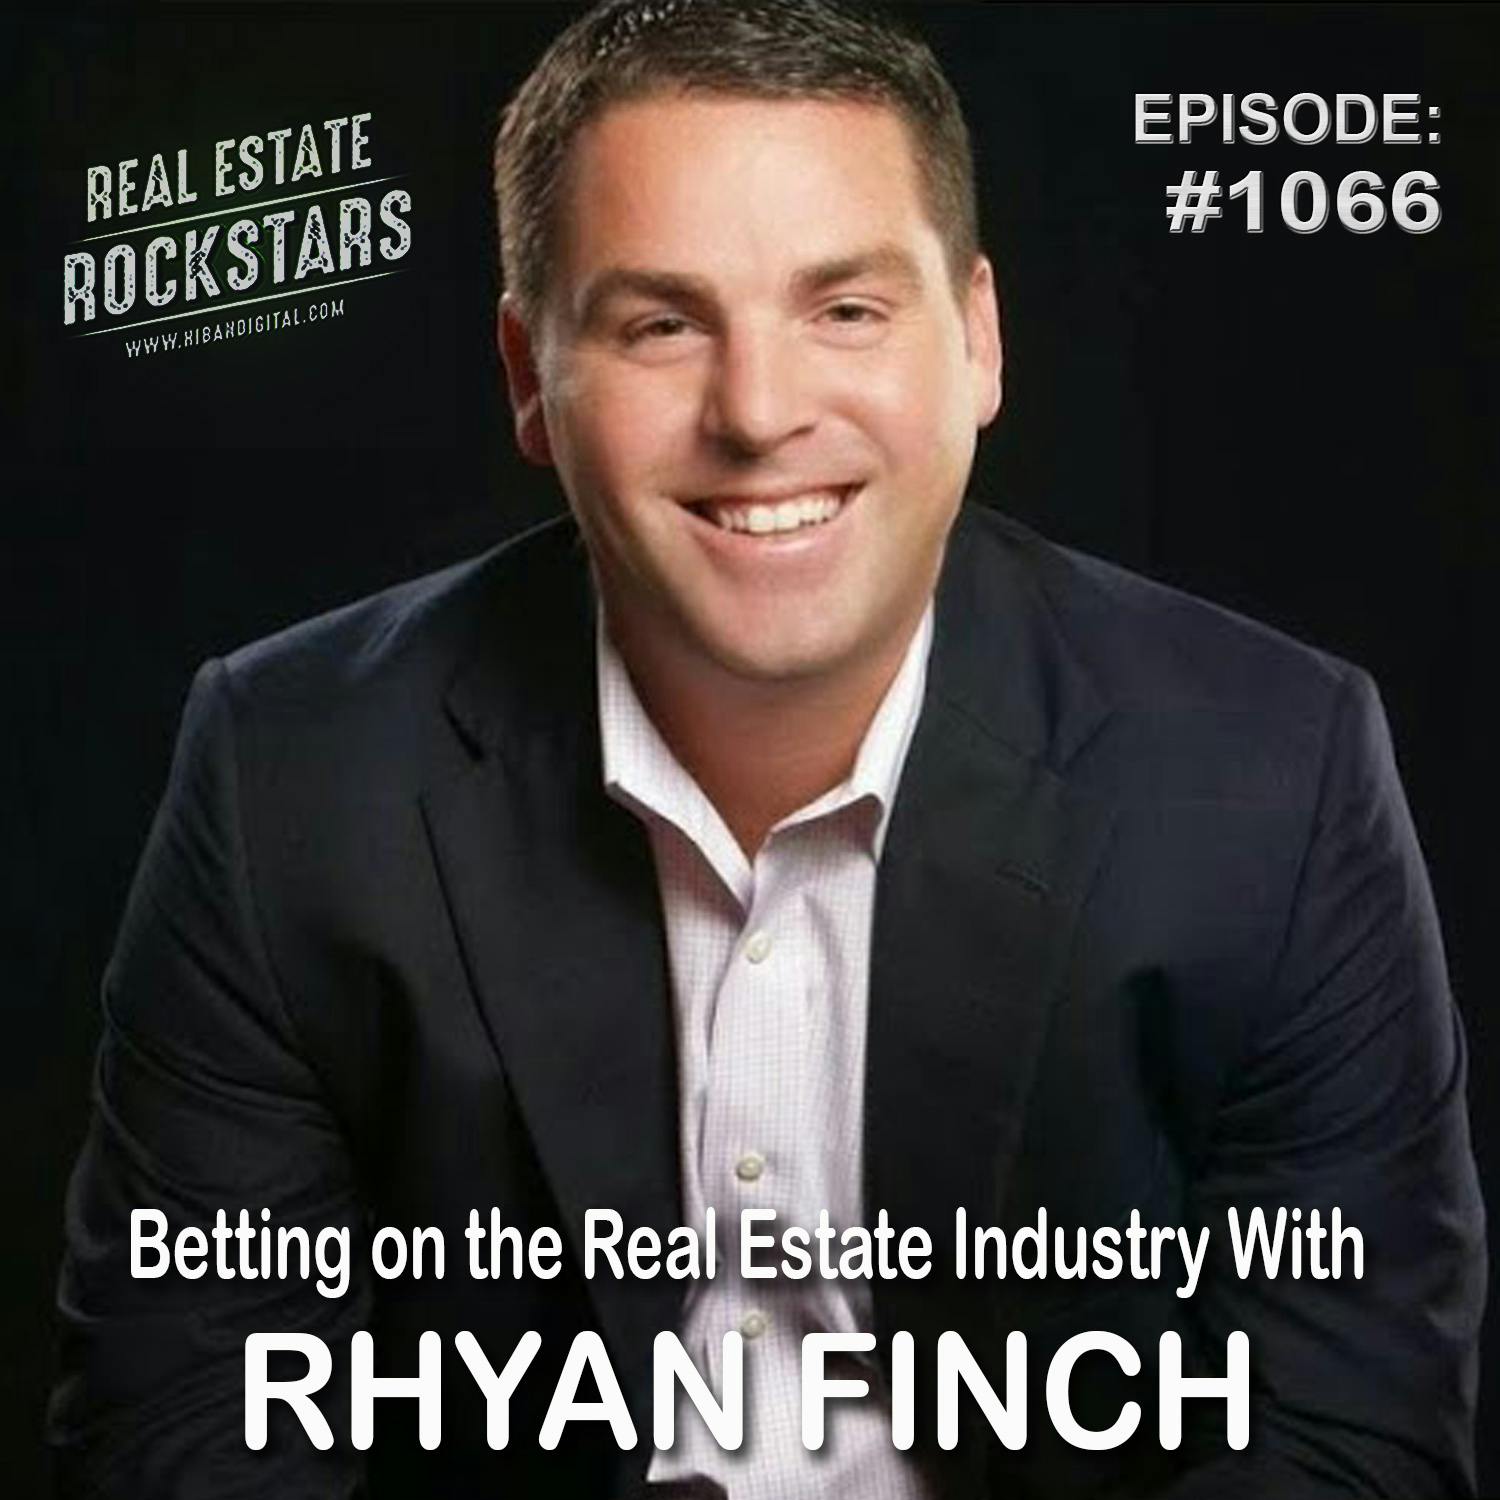 1066: Betting on the Real Estate Industry With Rhyan Finch